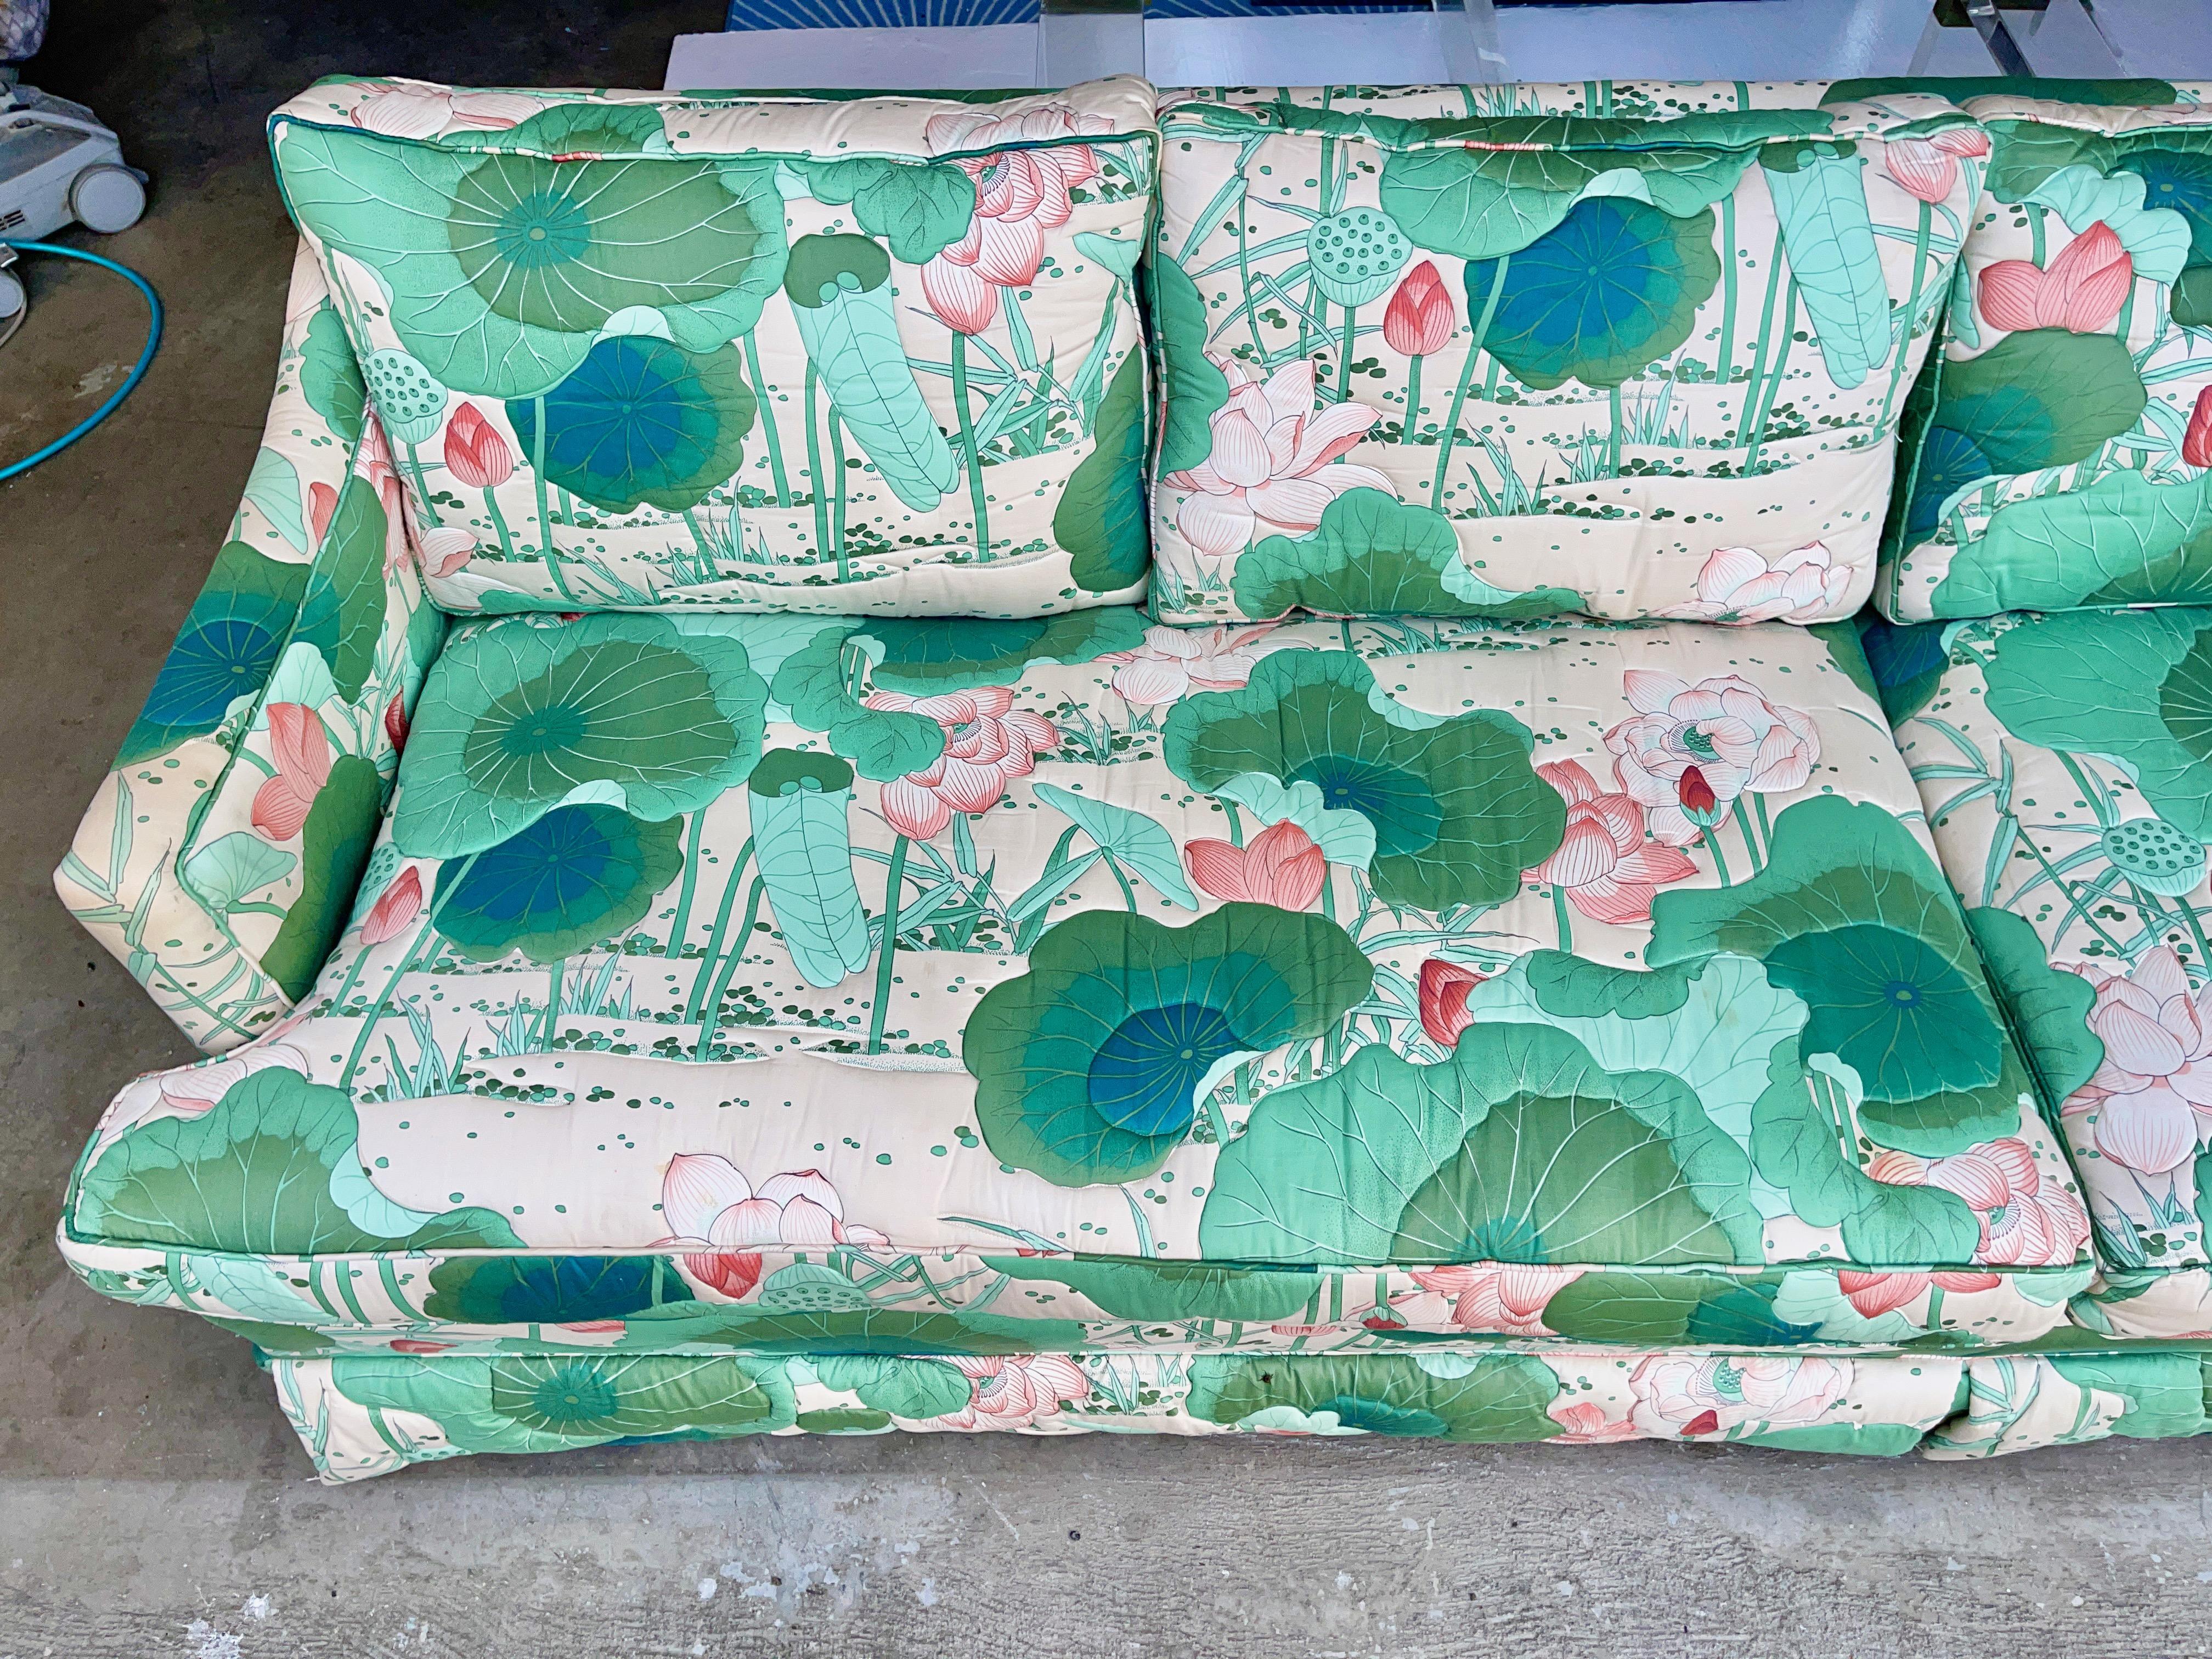 Gestepptes Lilly Pad-Sofa im Zustand „Gut“ im Angebot in Hanover, MA